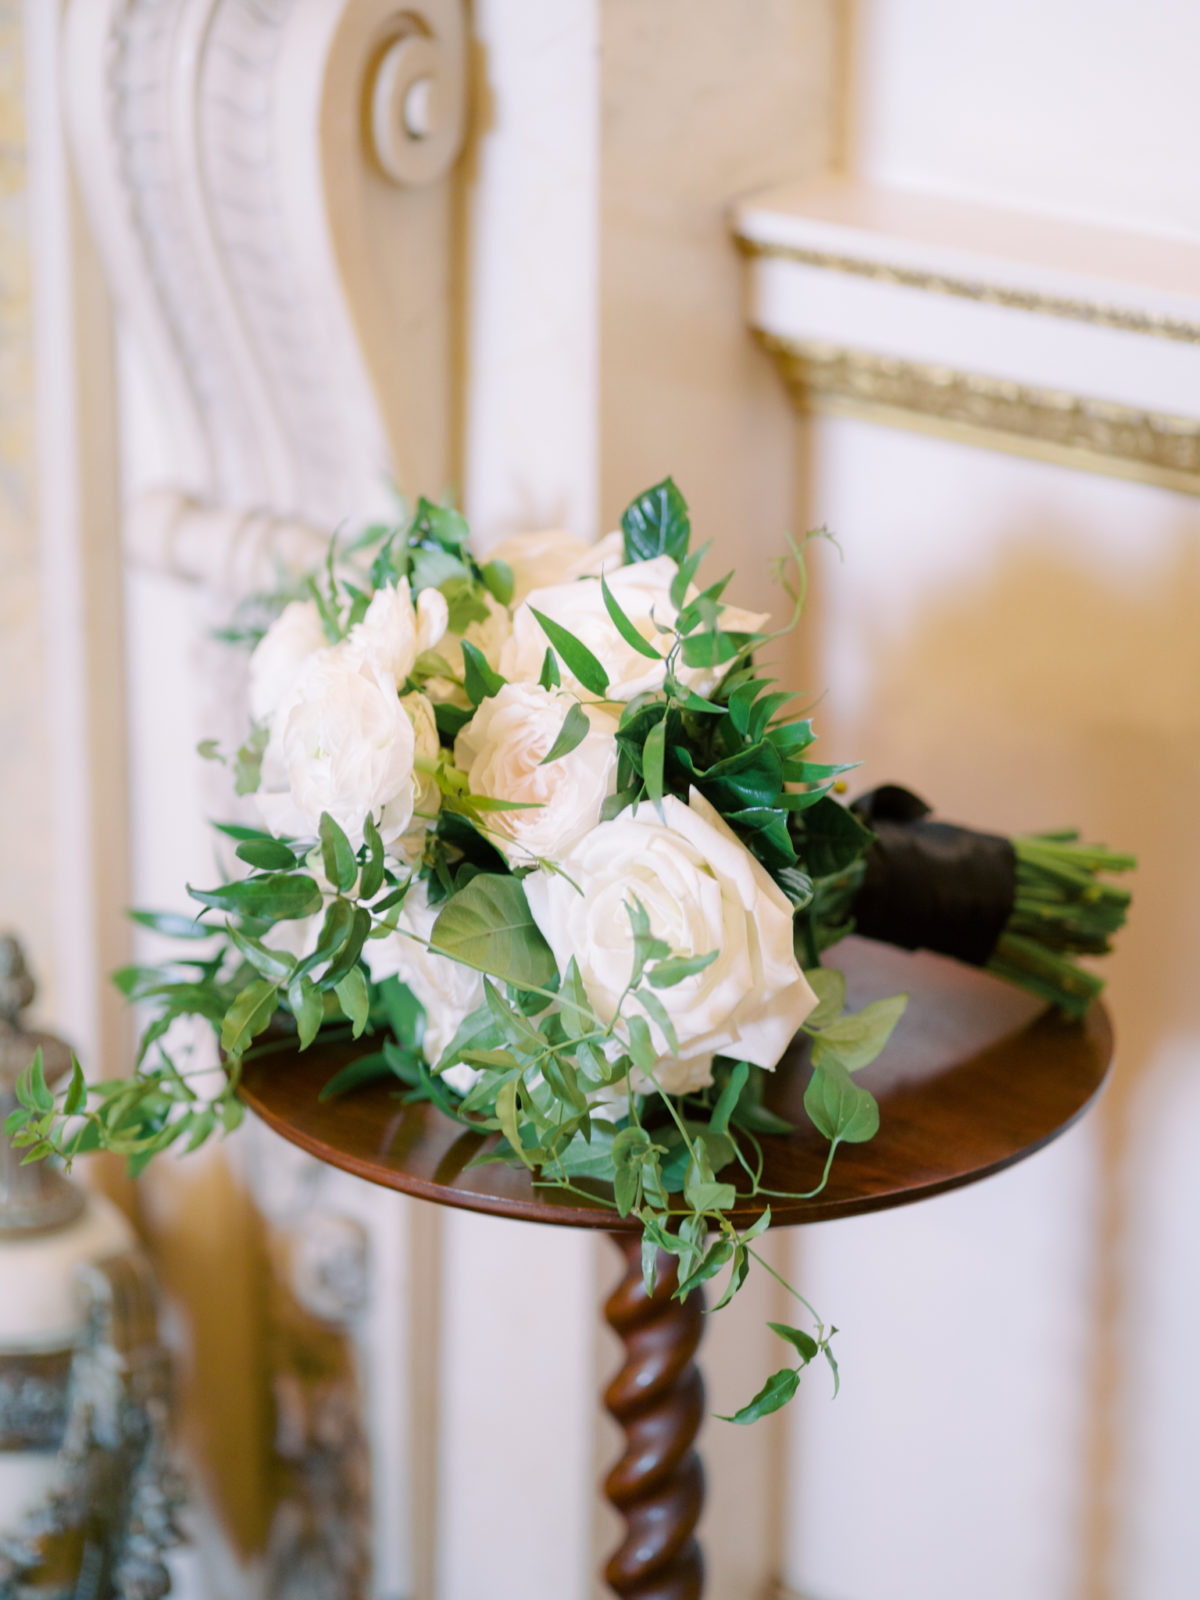 White roses and smilax wedding bouquet for luxury DC wedding at Anderson House.